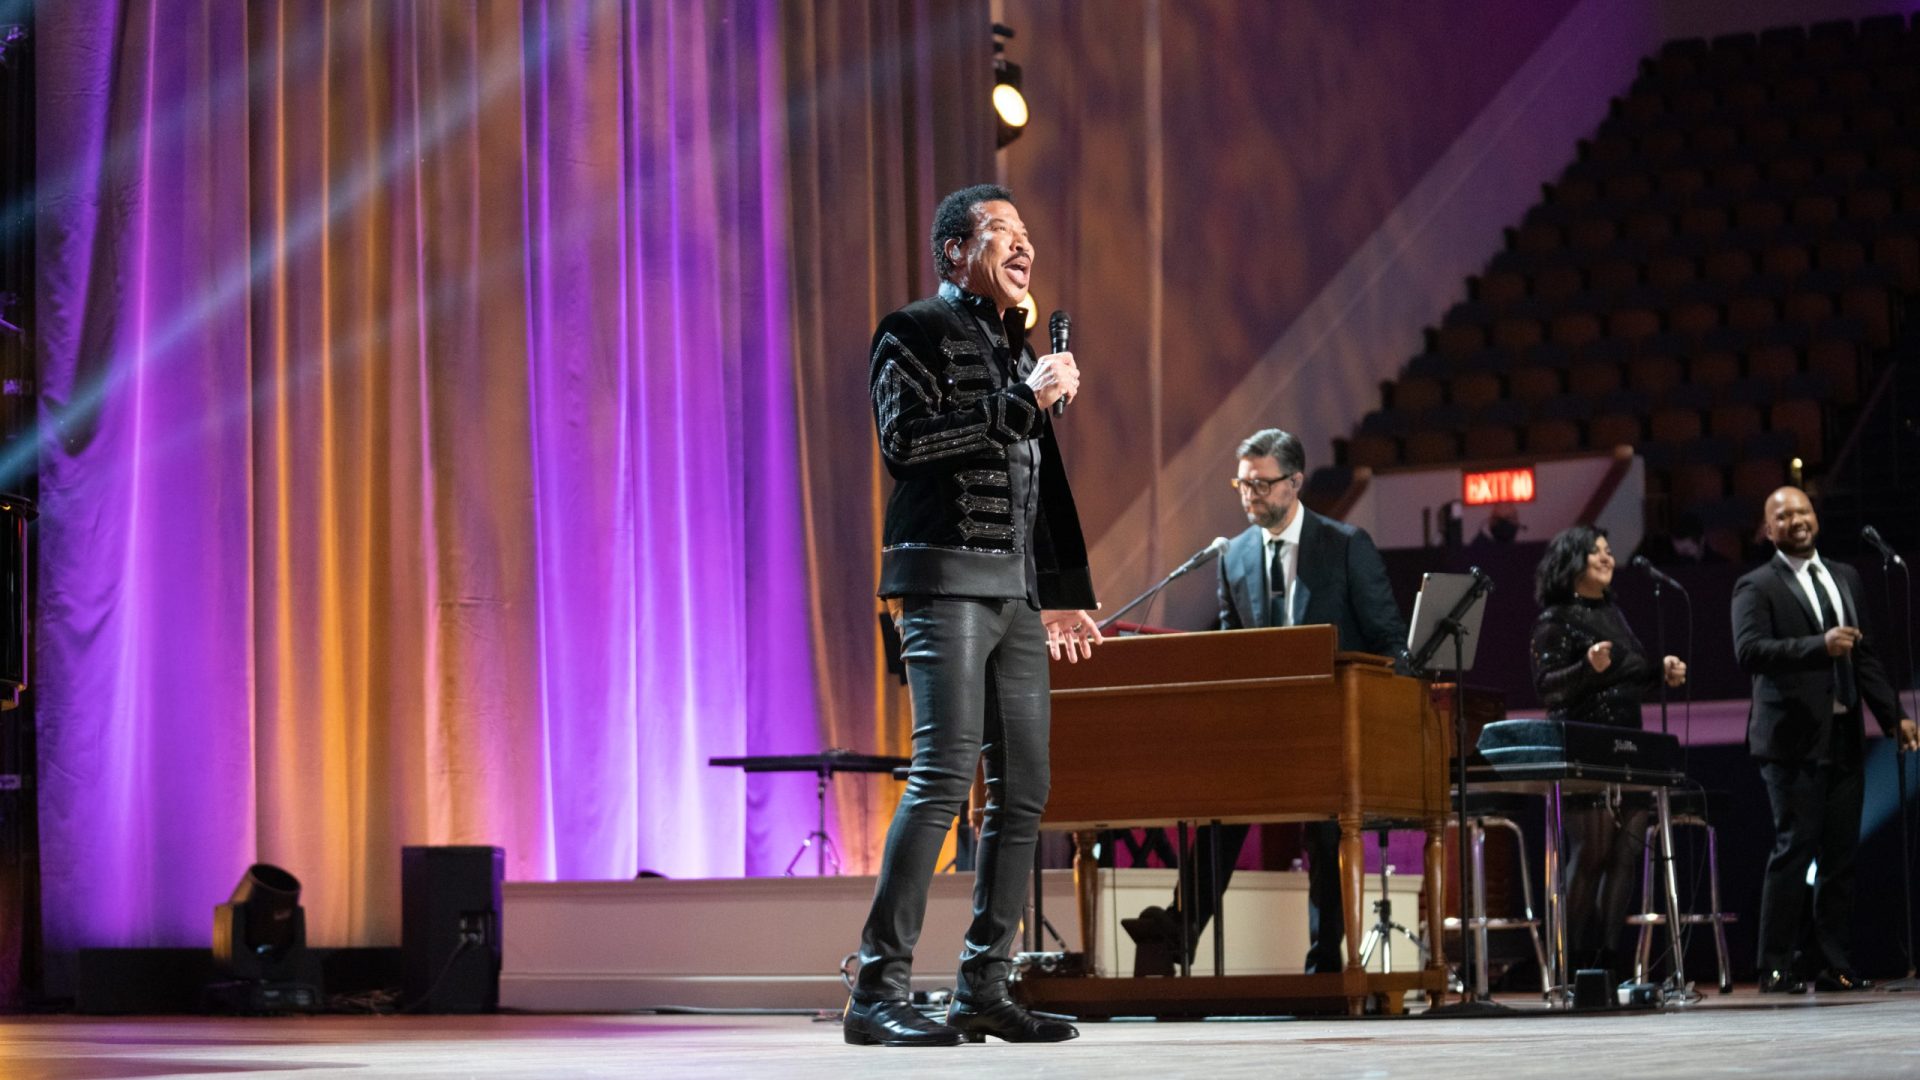 Lionel Richie performs at the 2022 LIBRARY OF CONGRESS GERSHWIN PRIZE FOR POPULAR SONG.